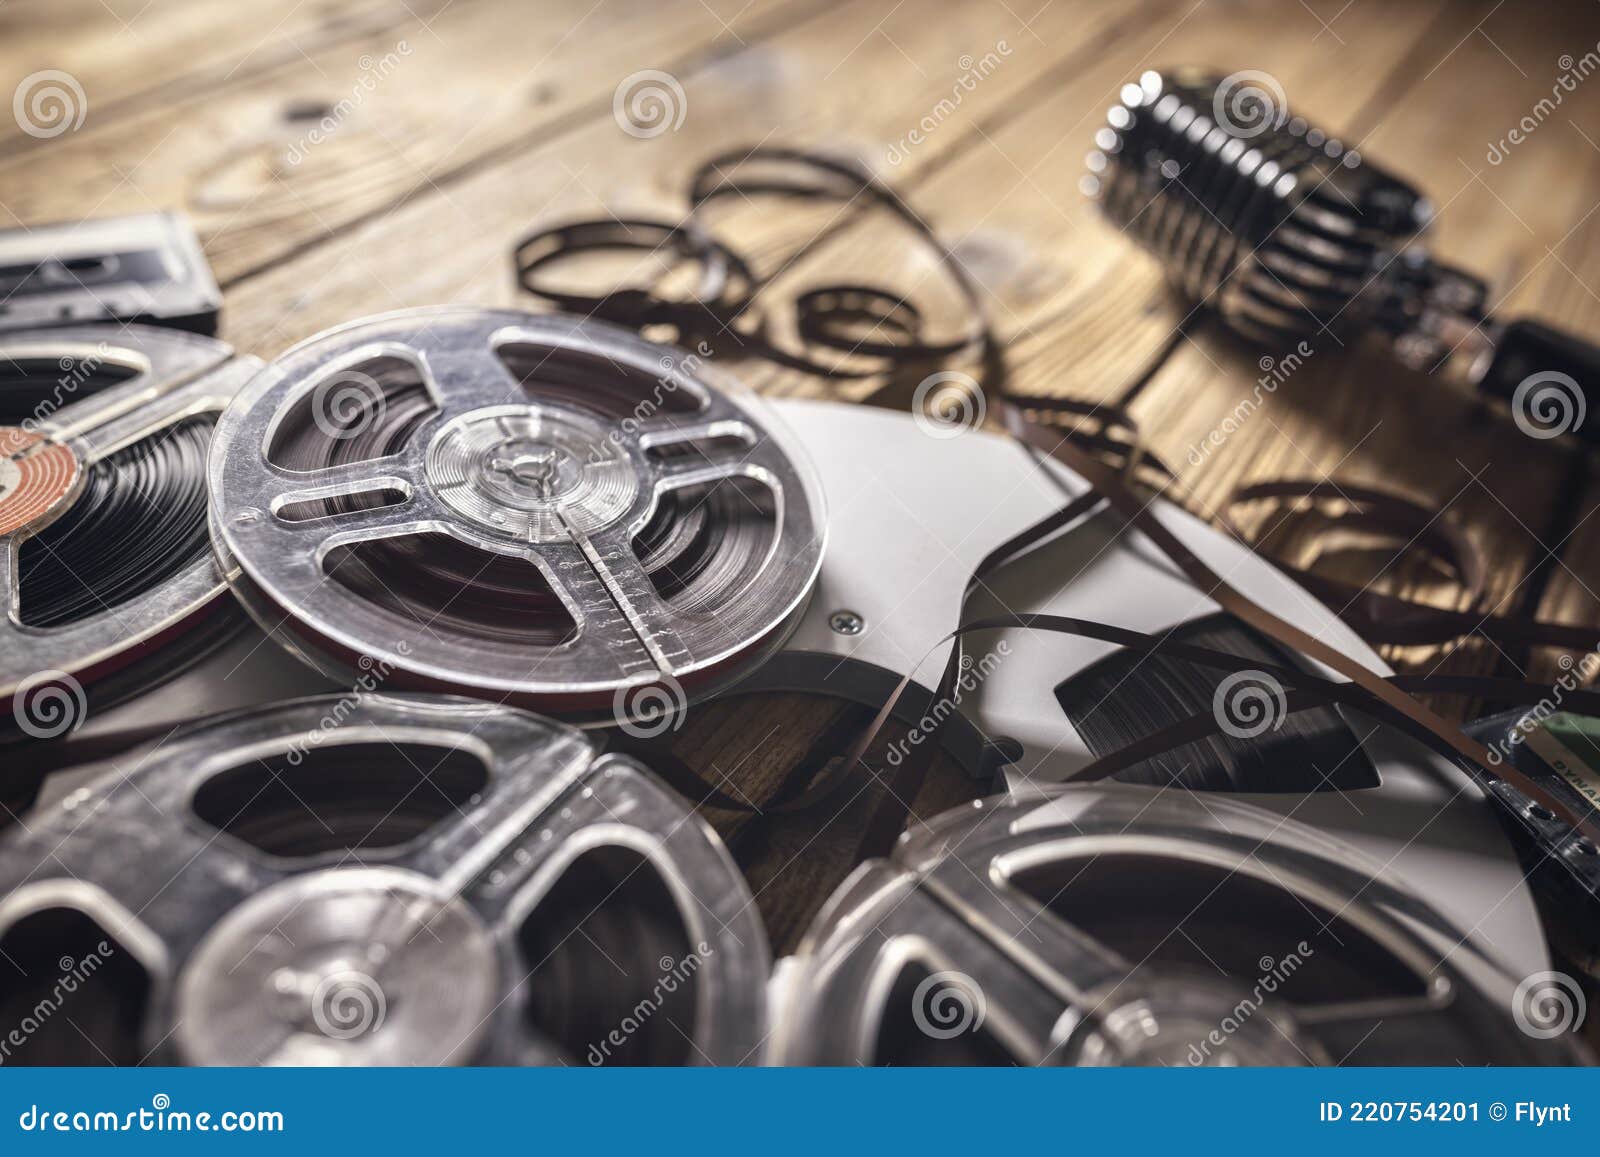 https://thumbs.dreamstime.com/z/old-audio-reels-cassette-tape-retro-microphone-music-background-220754201.jpg